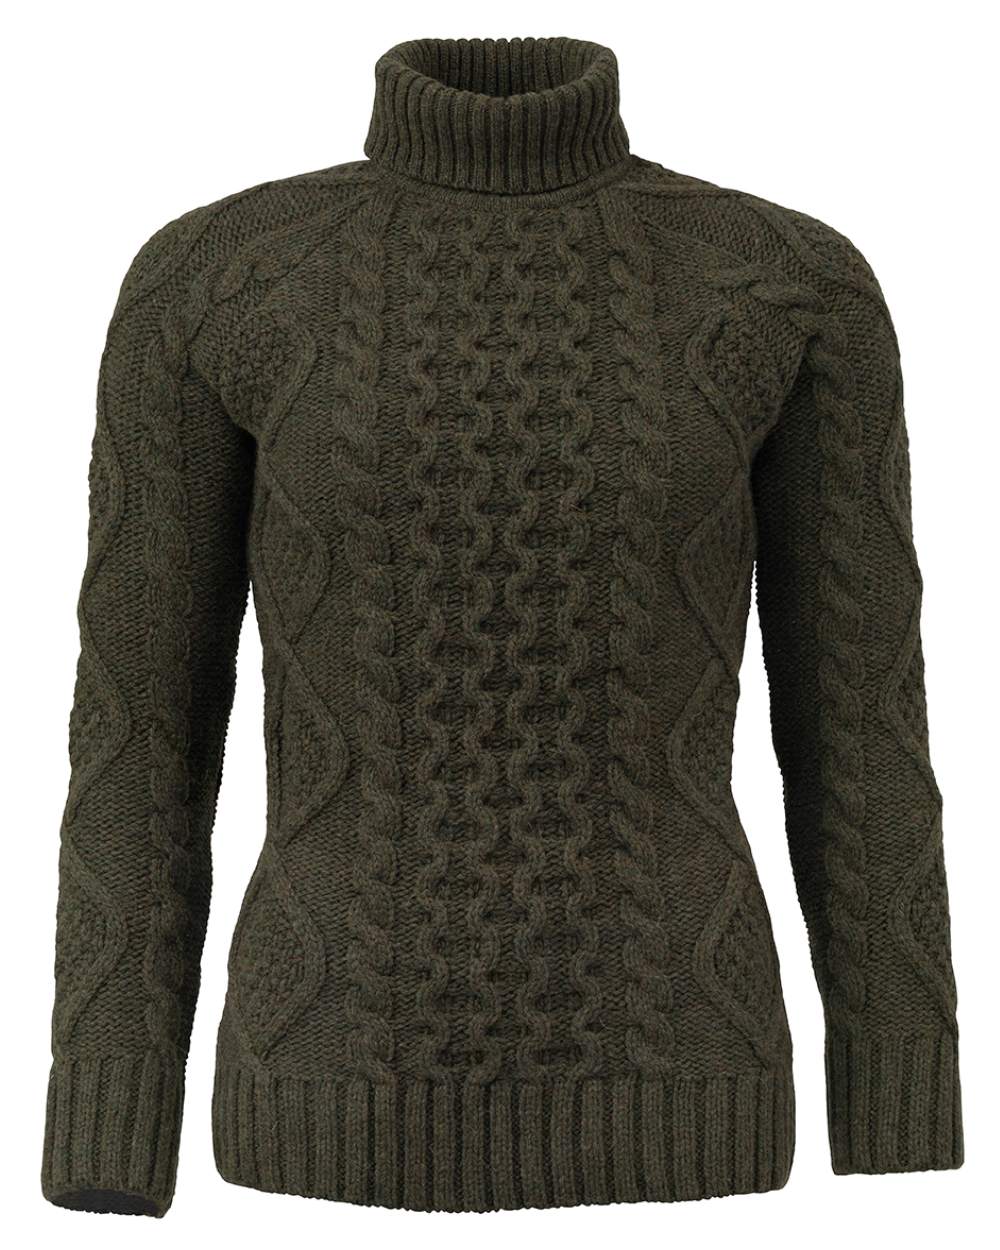 Olive Coloured Laksen Knightsbridge Cableknit Rollneck On A White Background